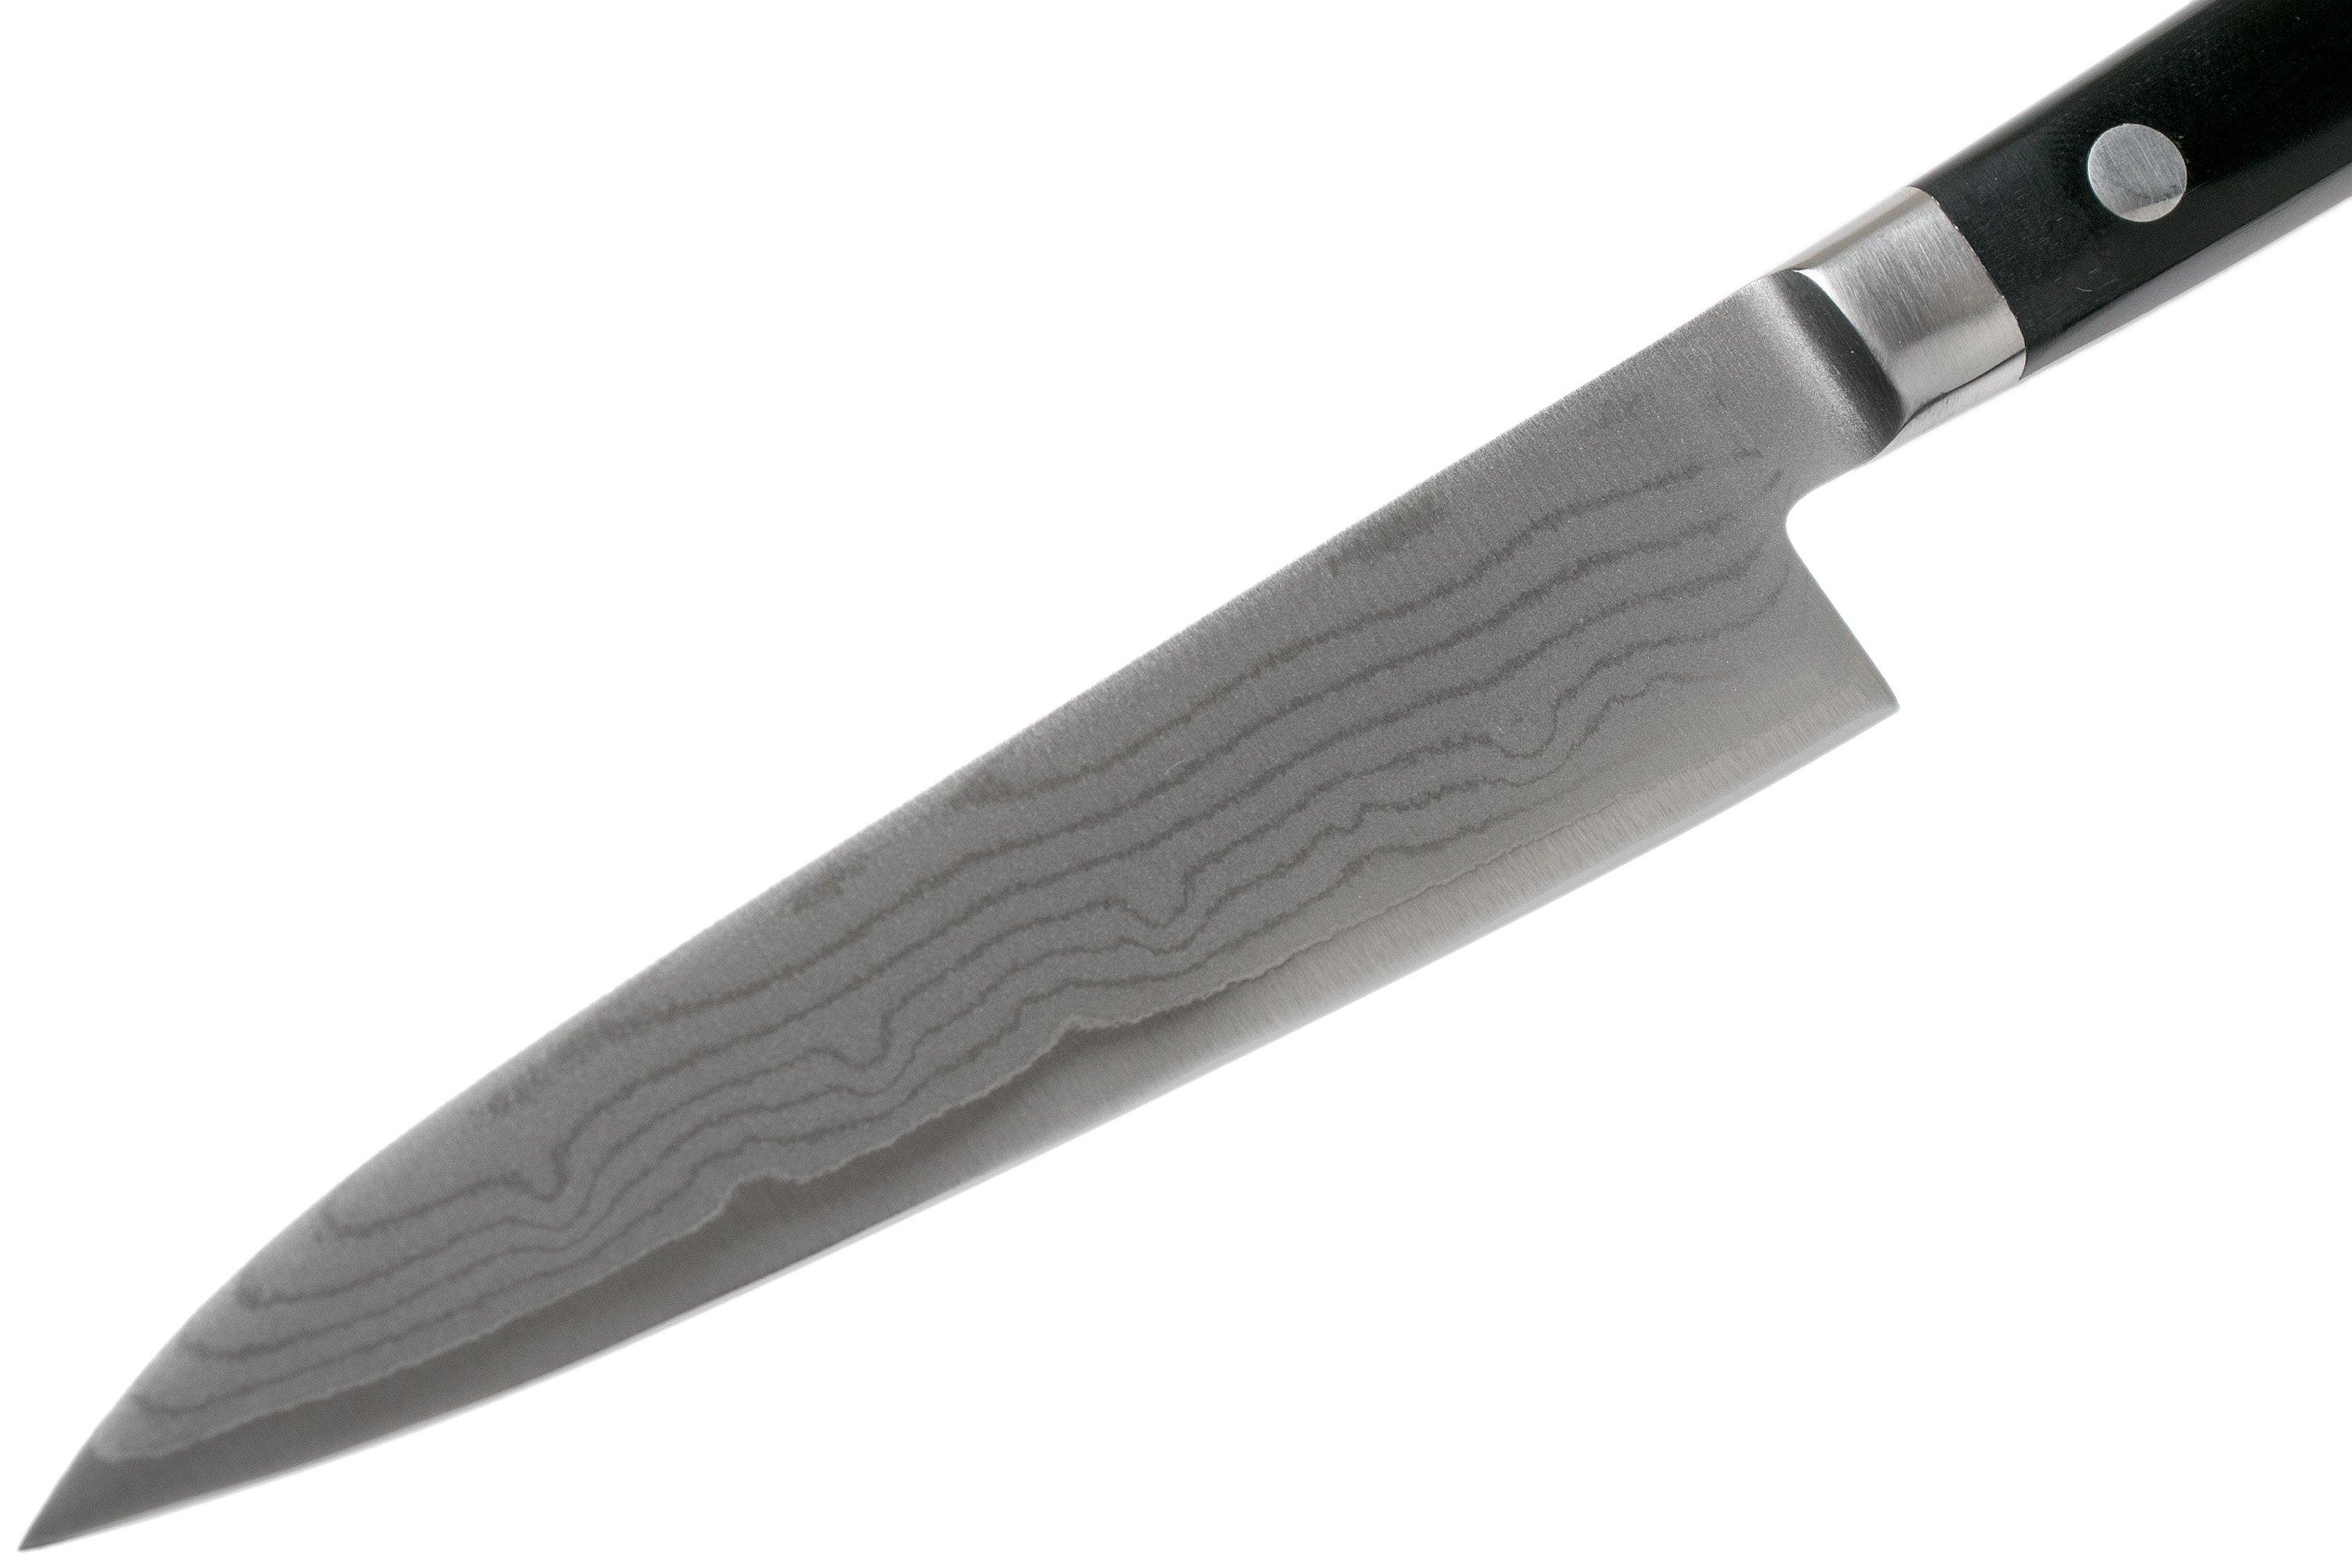 Tojiro DP 37 layers Chefs Knife 12cm | Advantageously shopping at .